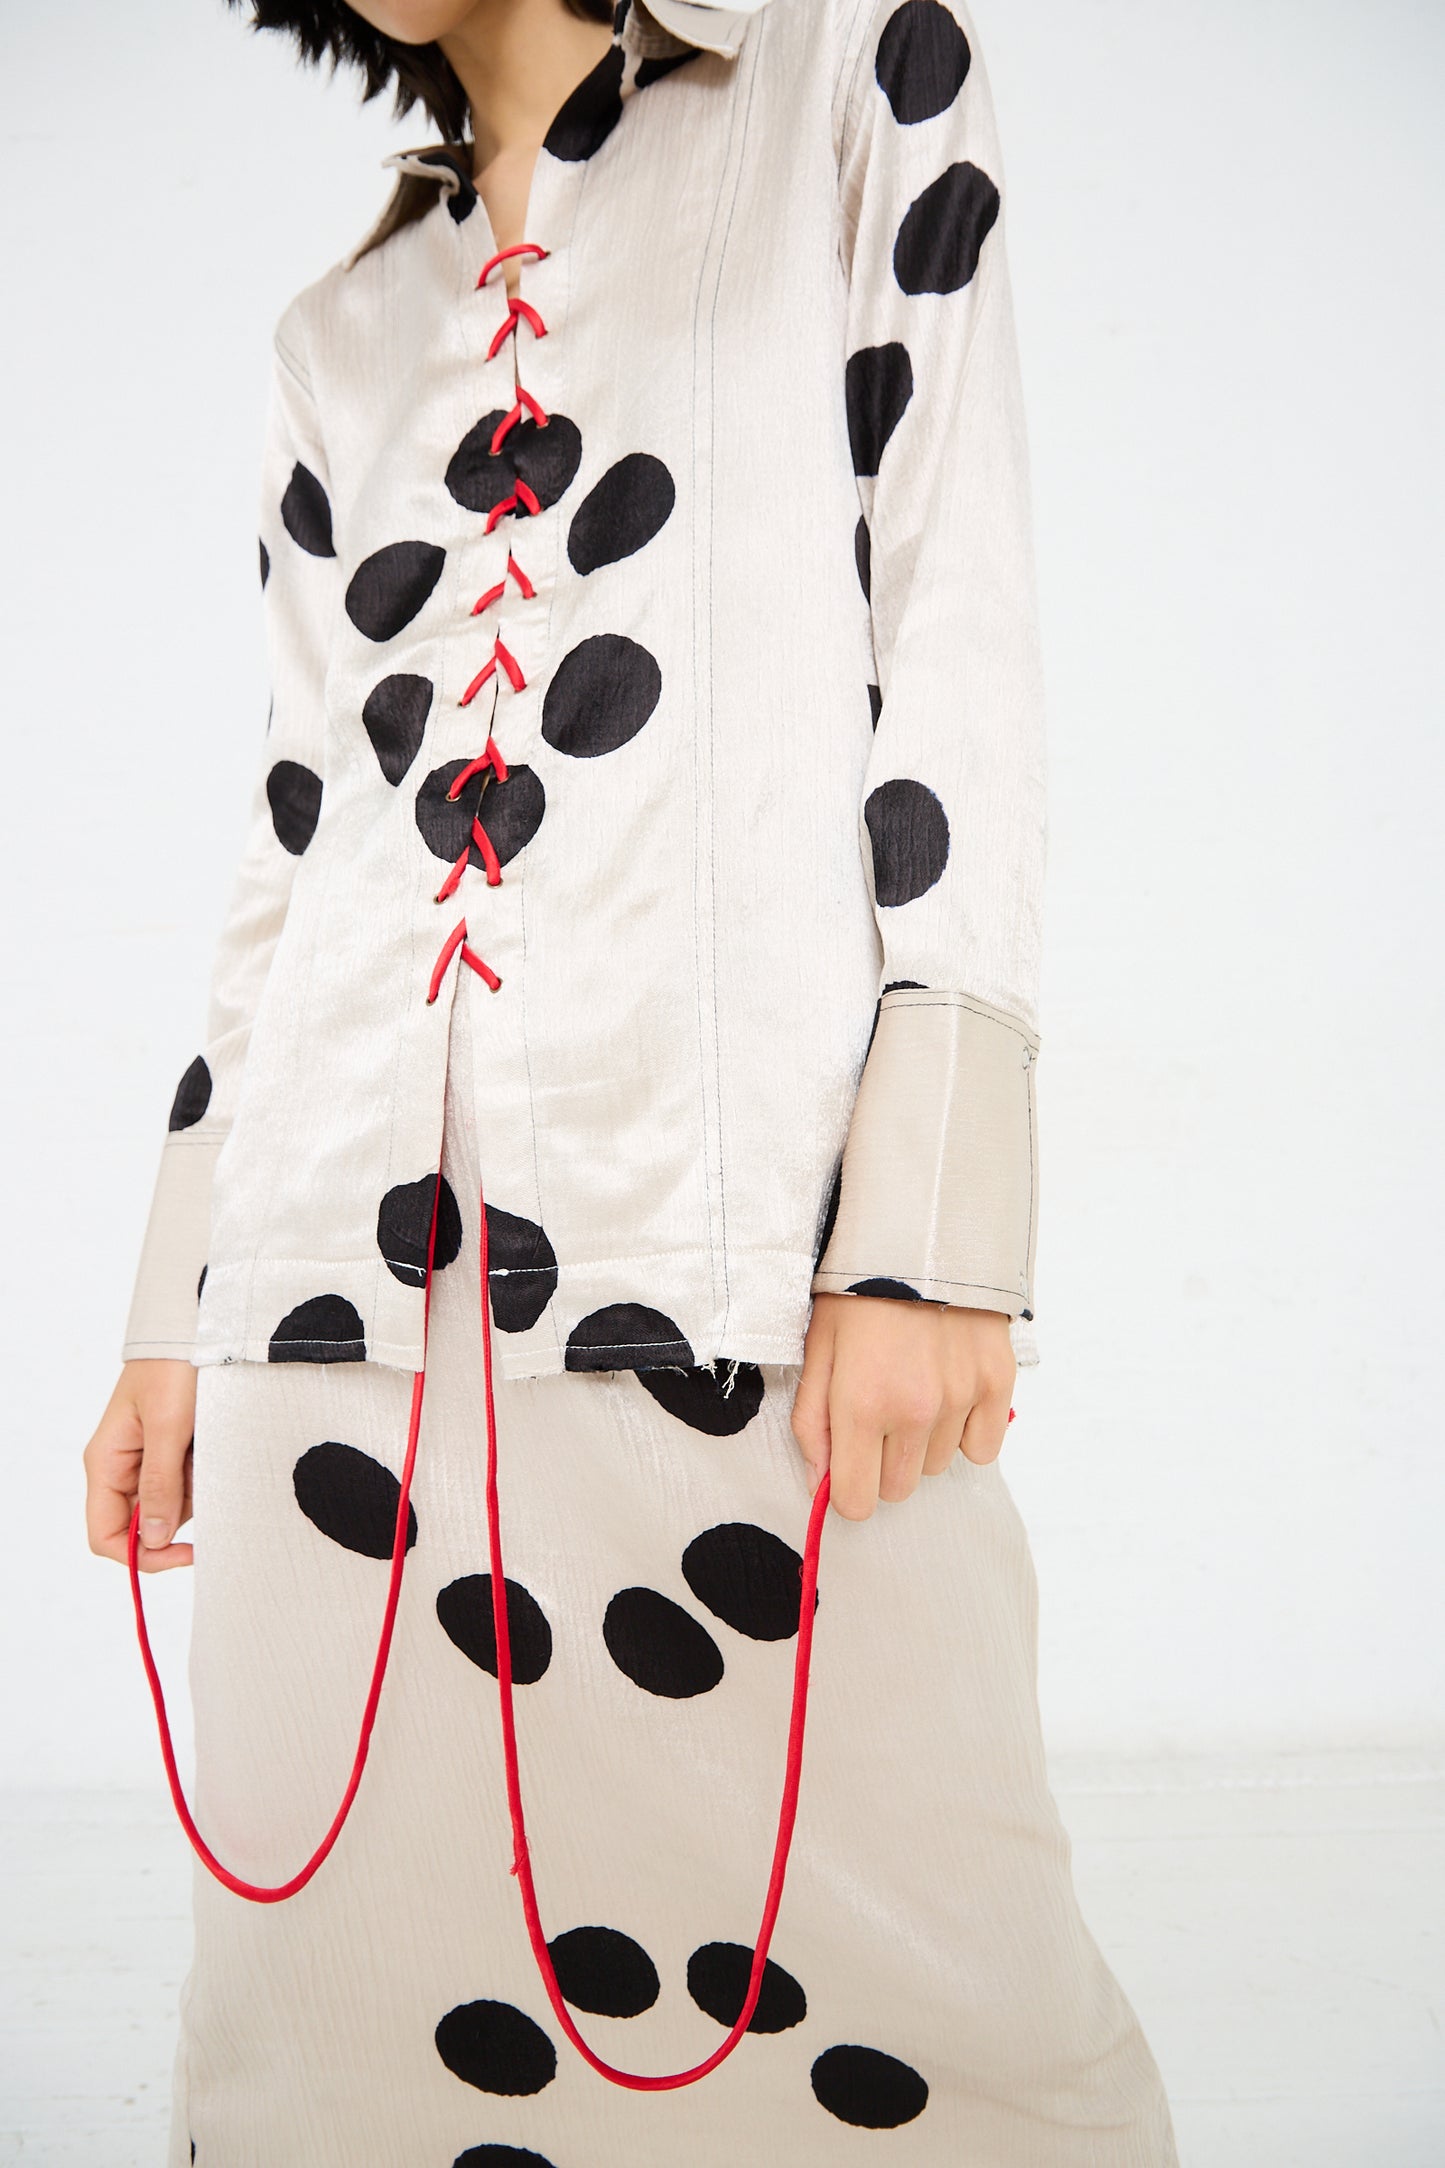 Person wearing a cream-colored, black polka-dotted outfit, featuring the Silk Mashroo Lace Up Shirt in White by TIGRA TIGRA with red lace-up detail and matching skirt, holding red cords hanging from the front. The unique pattern appears almost as hand clamp dyed moon dots. Face is partially out of frame.